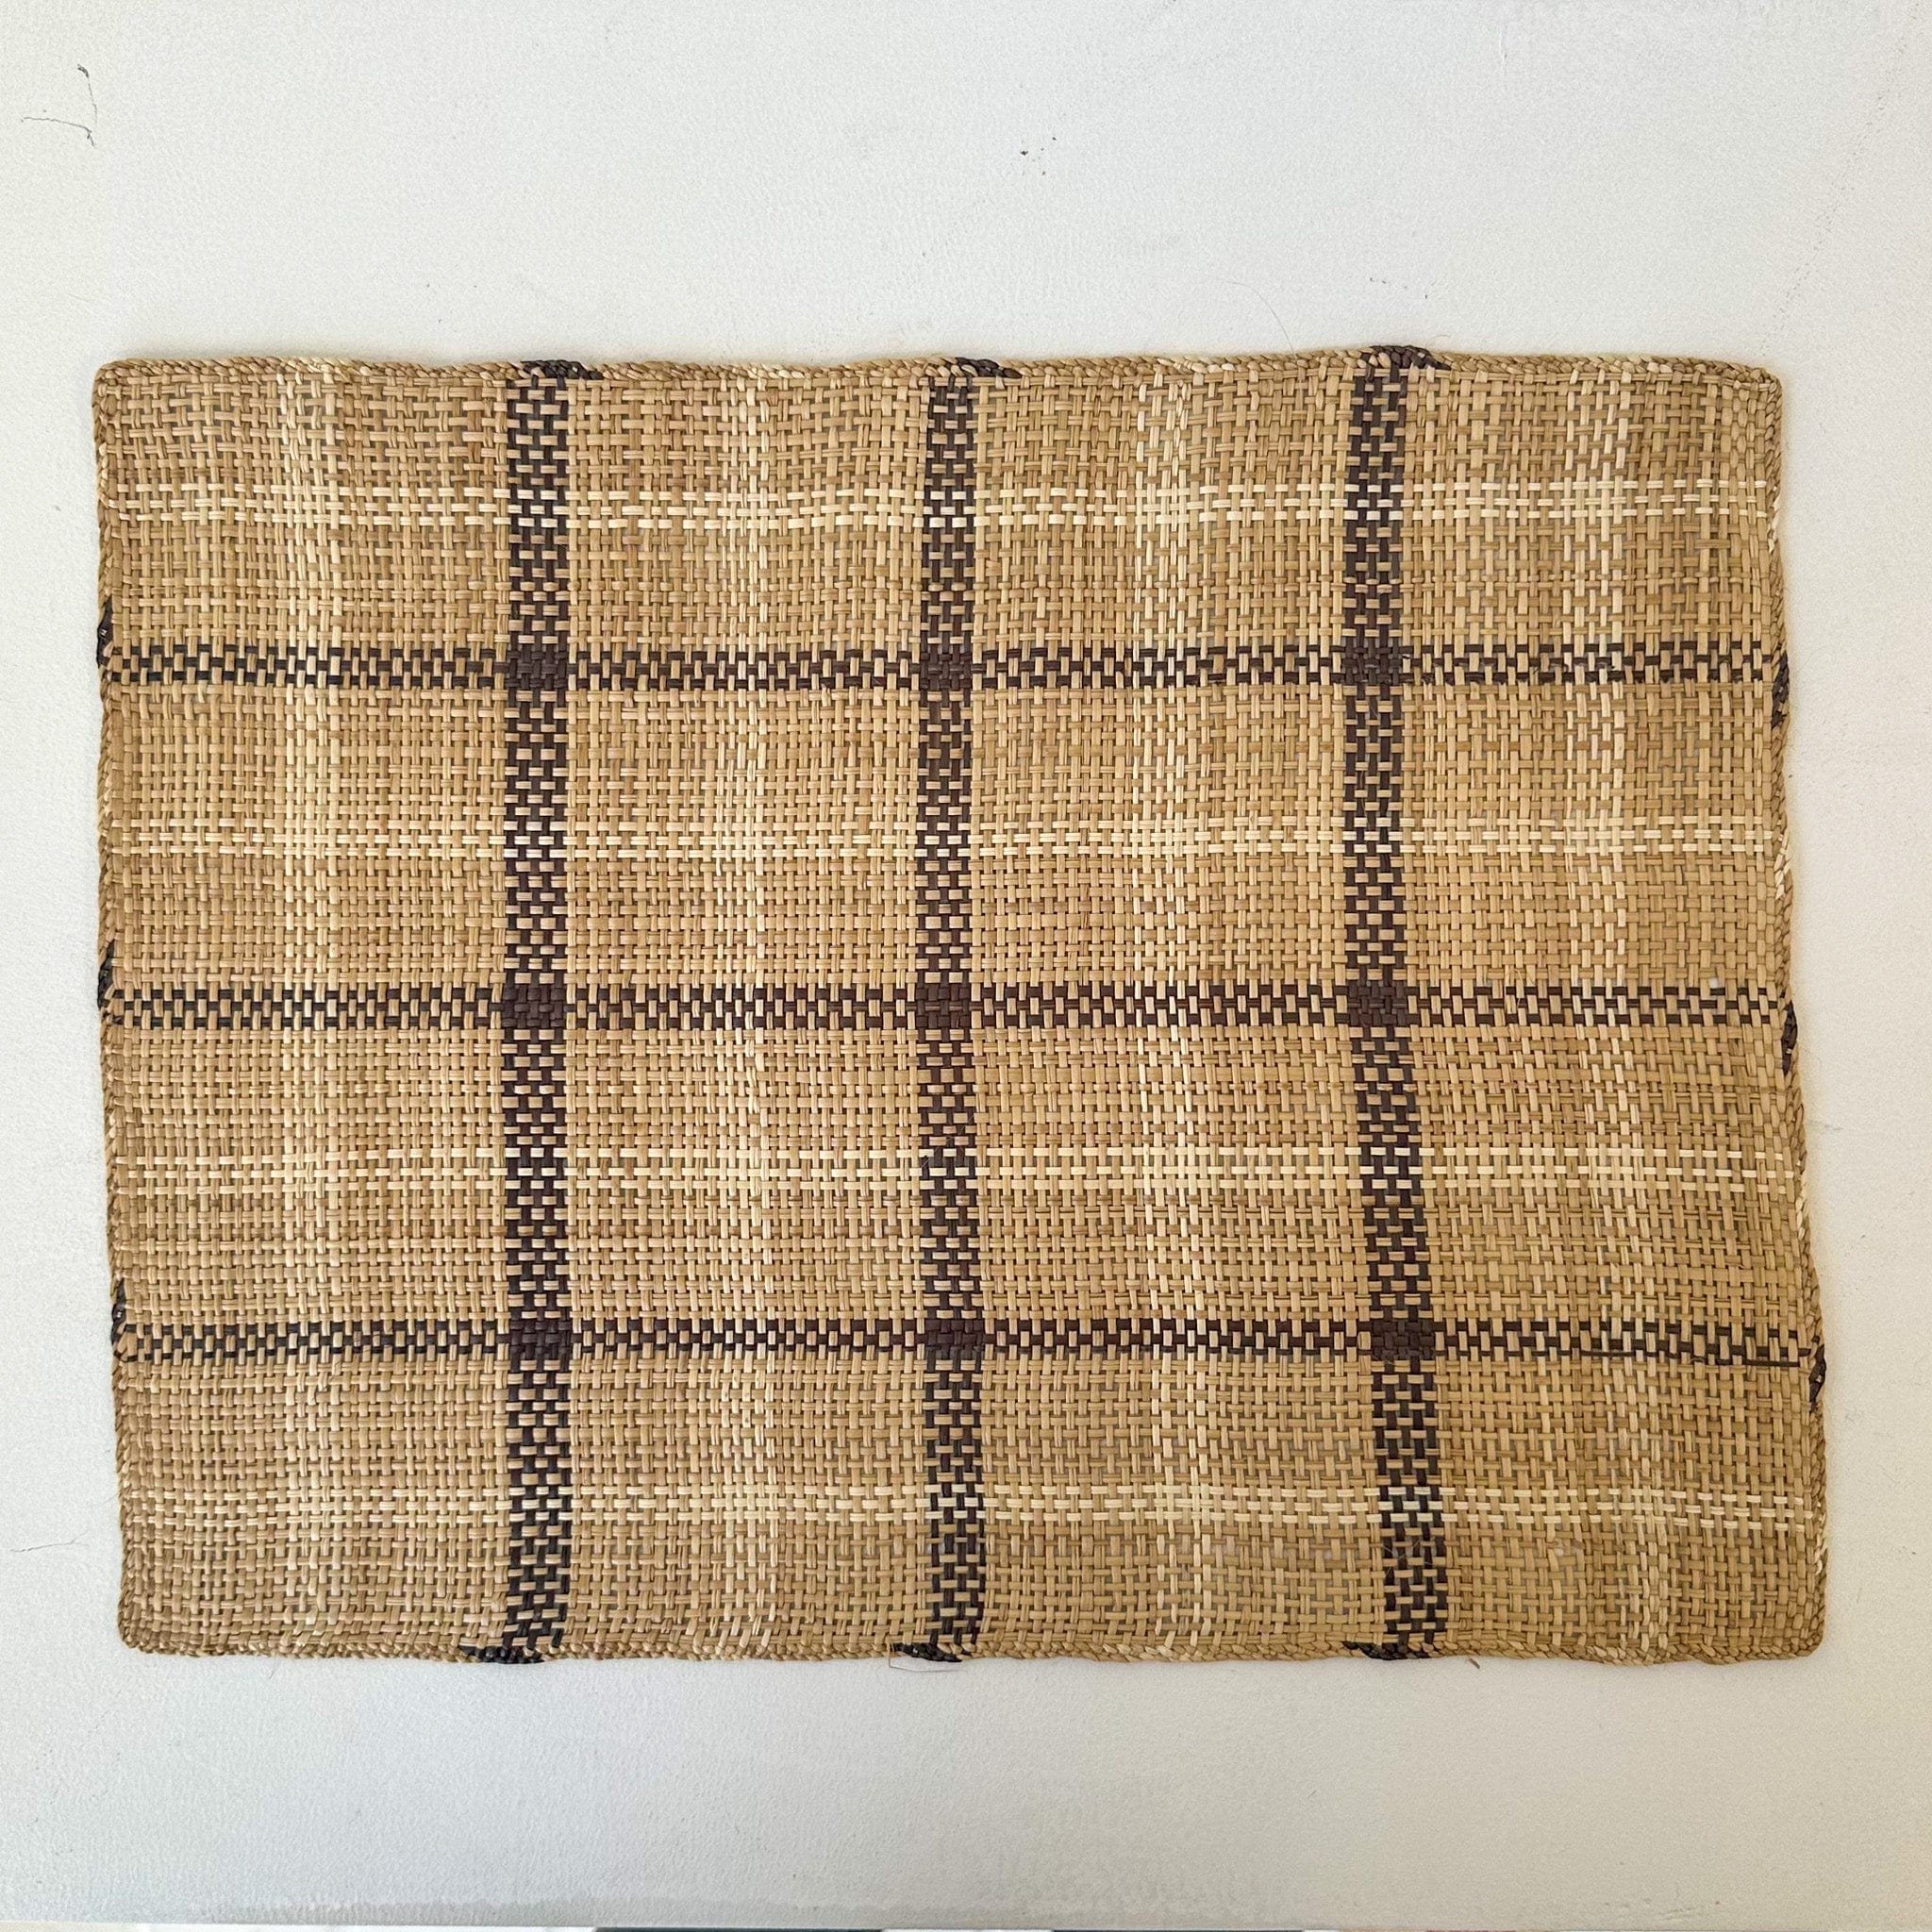 guanabana-placemats-natural-brown-striped-straw-placemat-by-guanabana-40556351947007.jpg